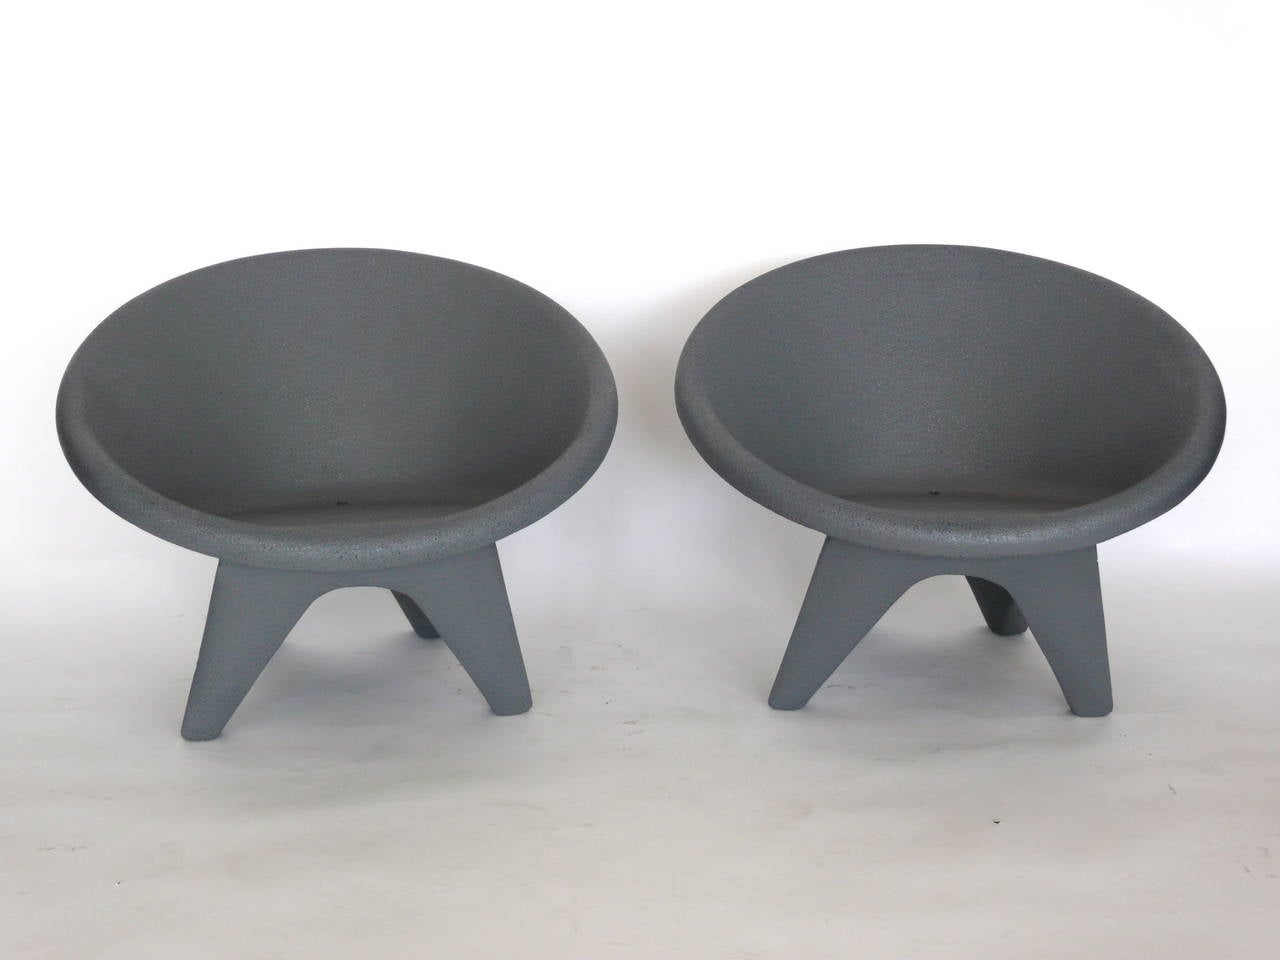 Unique pair of French concrete chairs. Angular base with four legs. Rounded frame with low profile seating. Newly painted in grey. Great lines. Perfect for the outdoor seating area or pool.